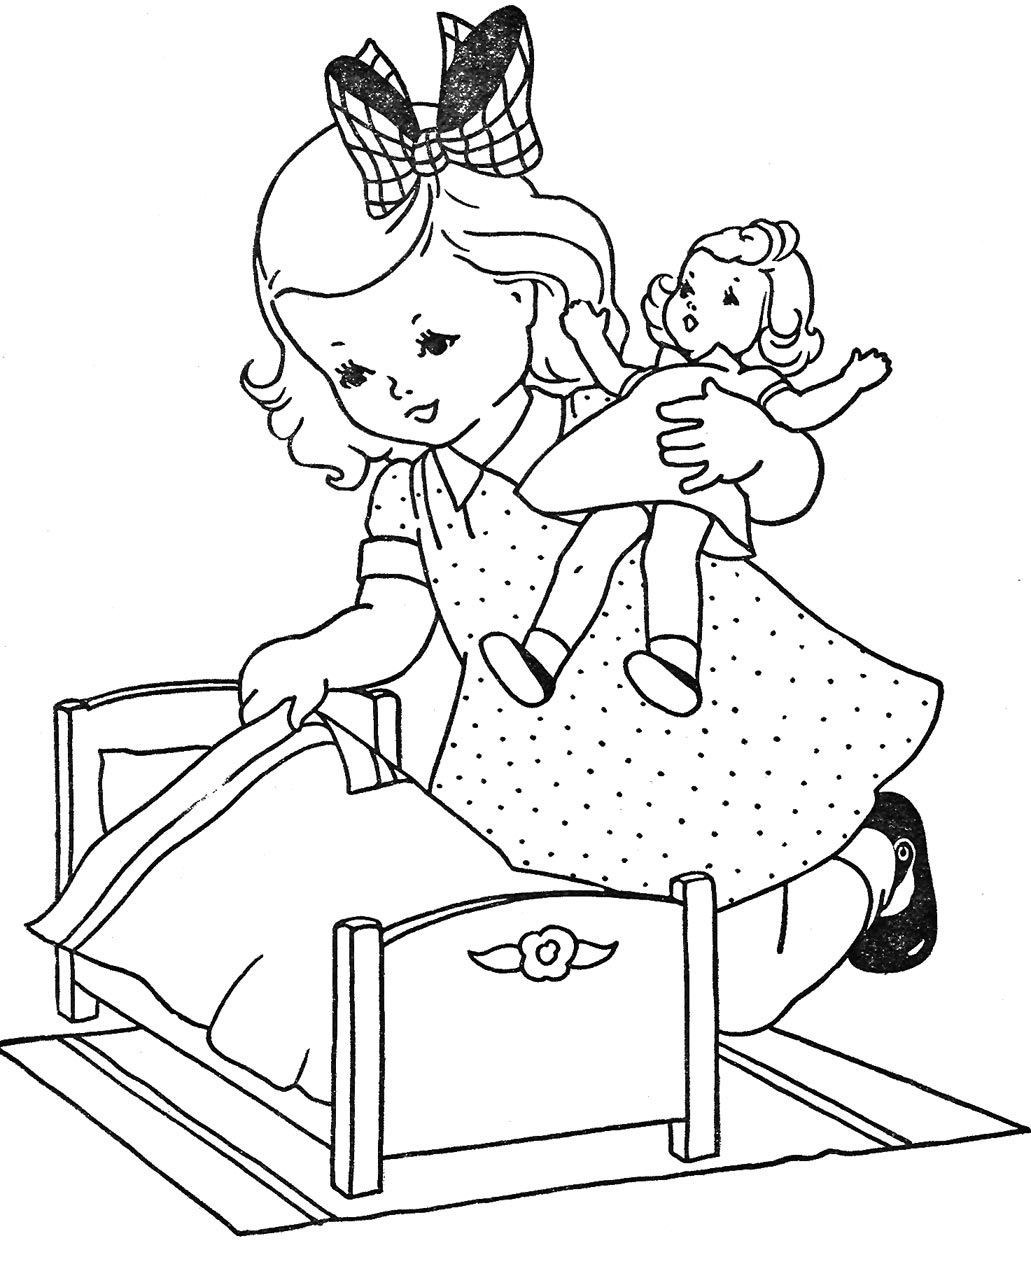 Coloring Pages For Boys And Girls
 Cute coloring pages for girls and boys Double click on